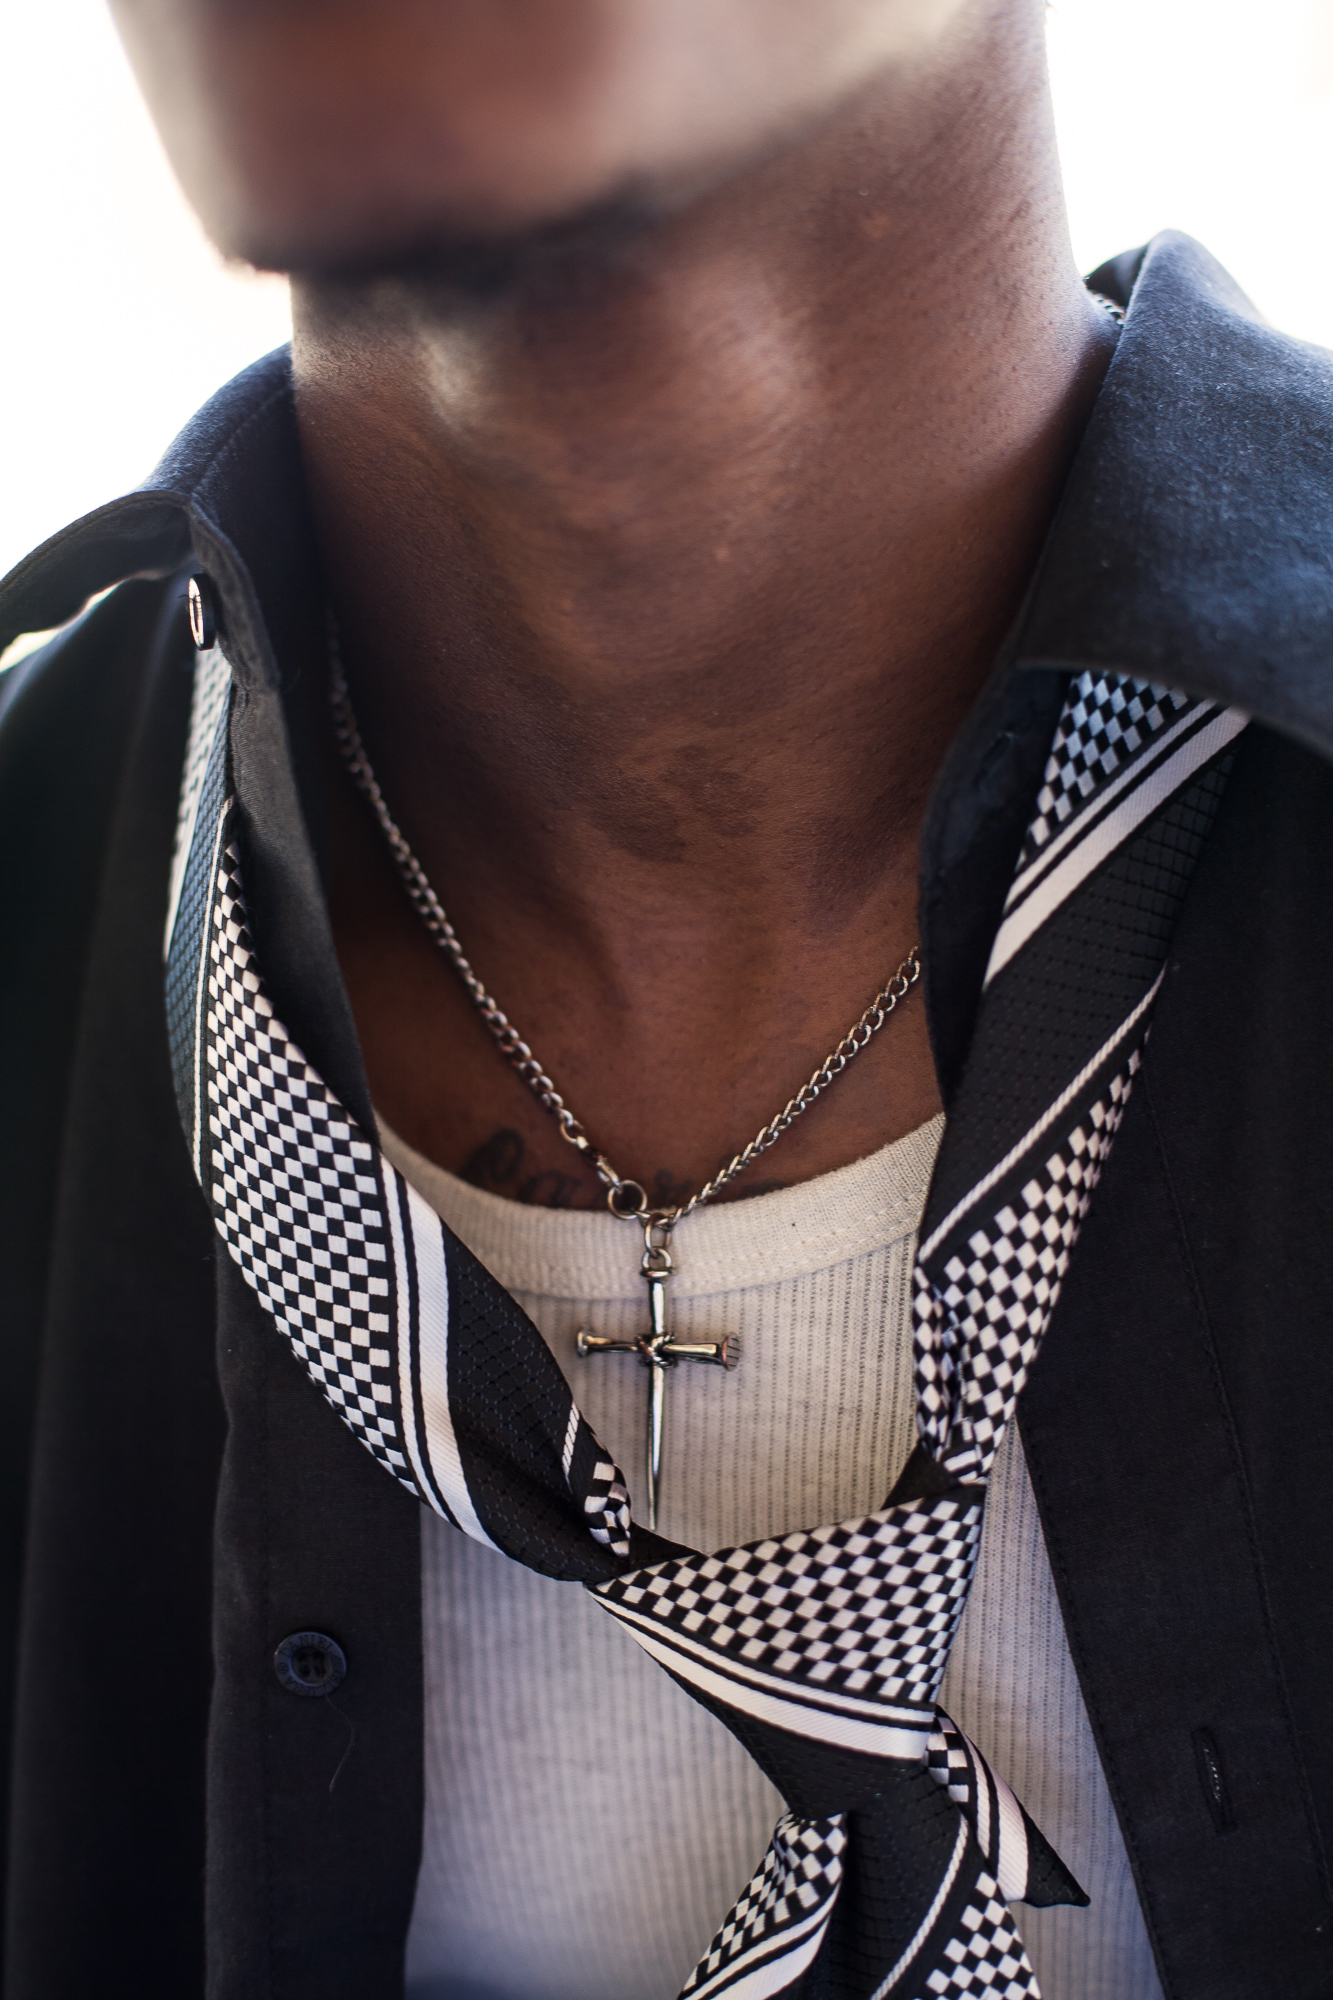  Rashard Johnson’s crucifix after a job fair for felons. In his lowest moments, Rashard finds refuge in his faith. 